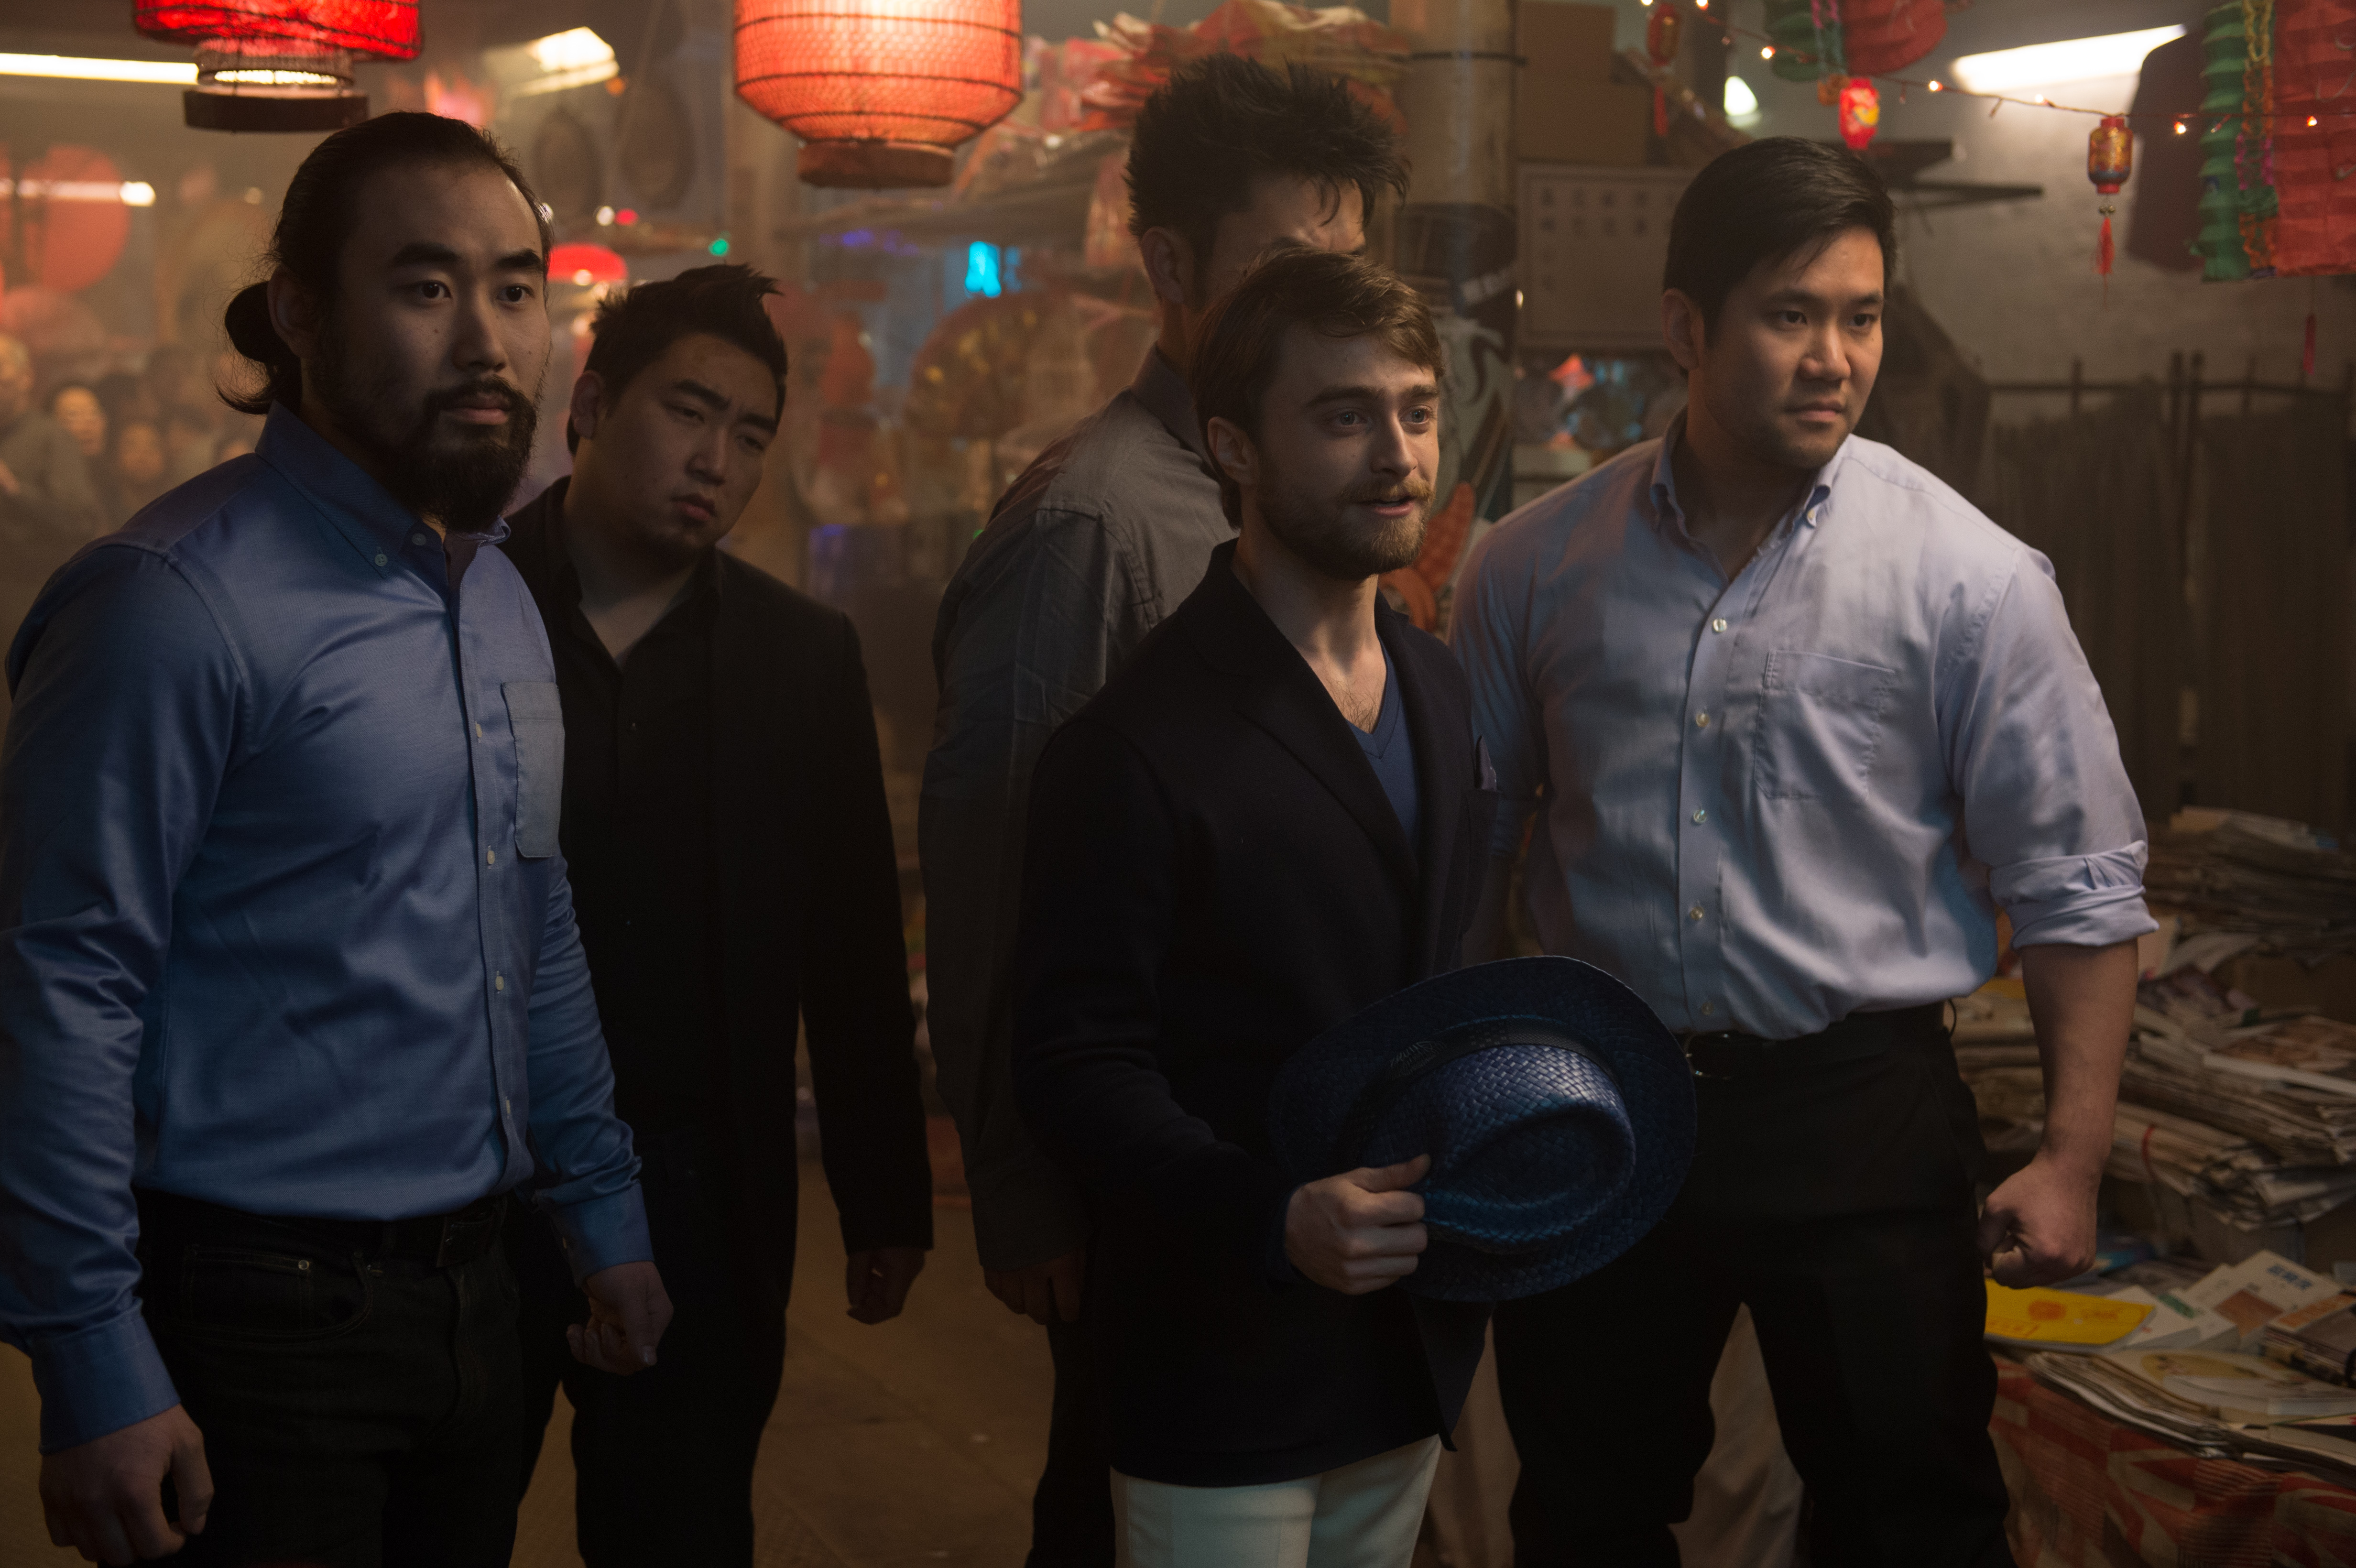 Daniel Radcliffe Now You See Me 2 Walter Now You See Me 4928x3280